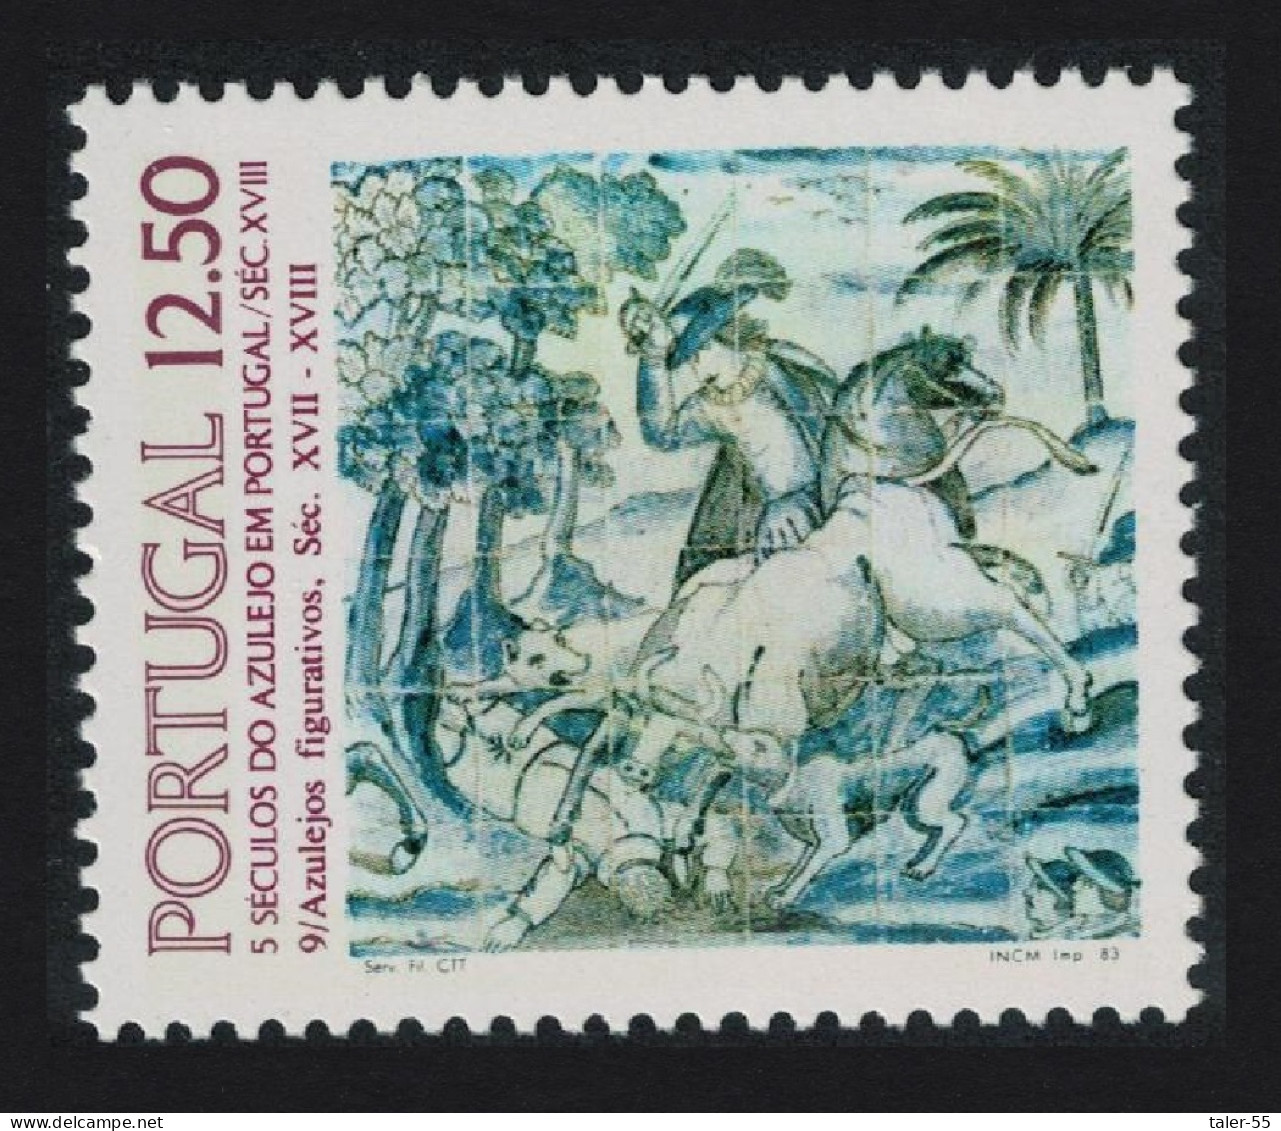 Portugal Tiles 9th Series 1983 MNH SG#1914 - Unused Stamps